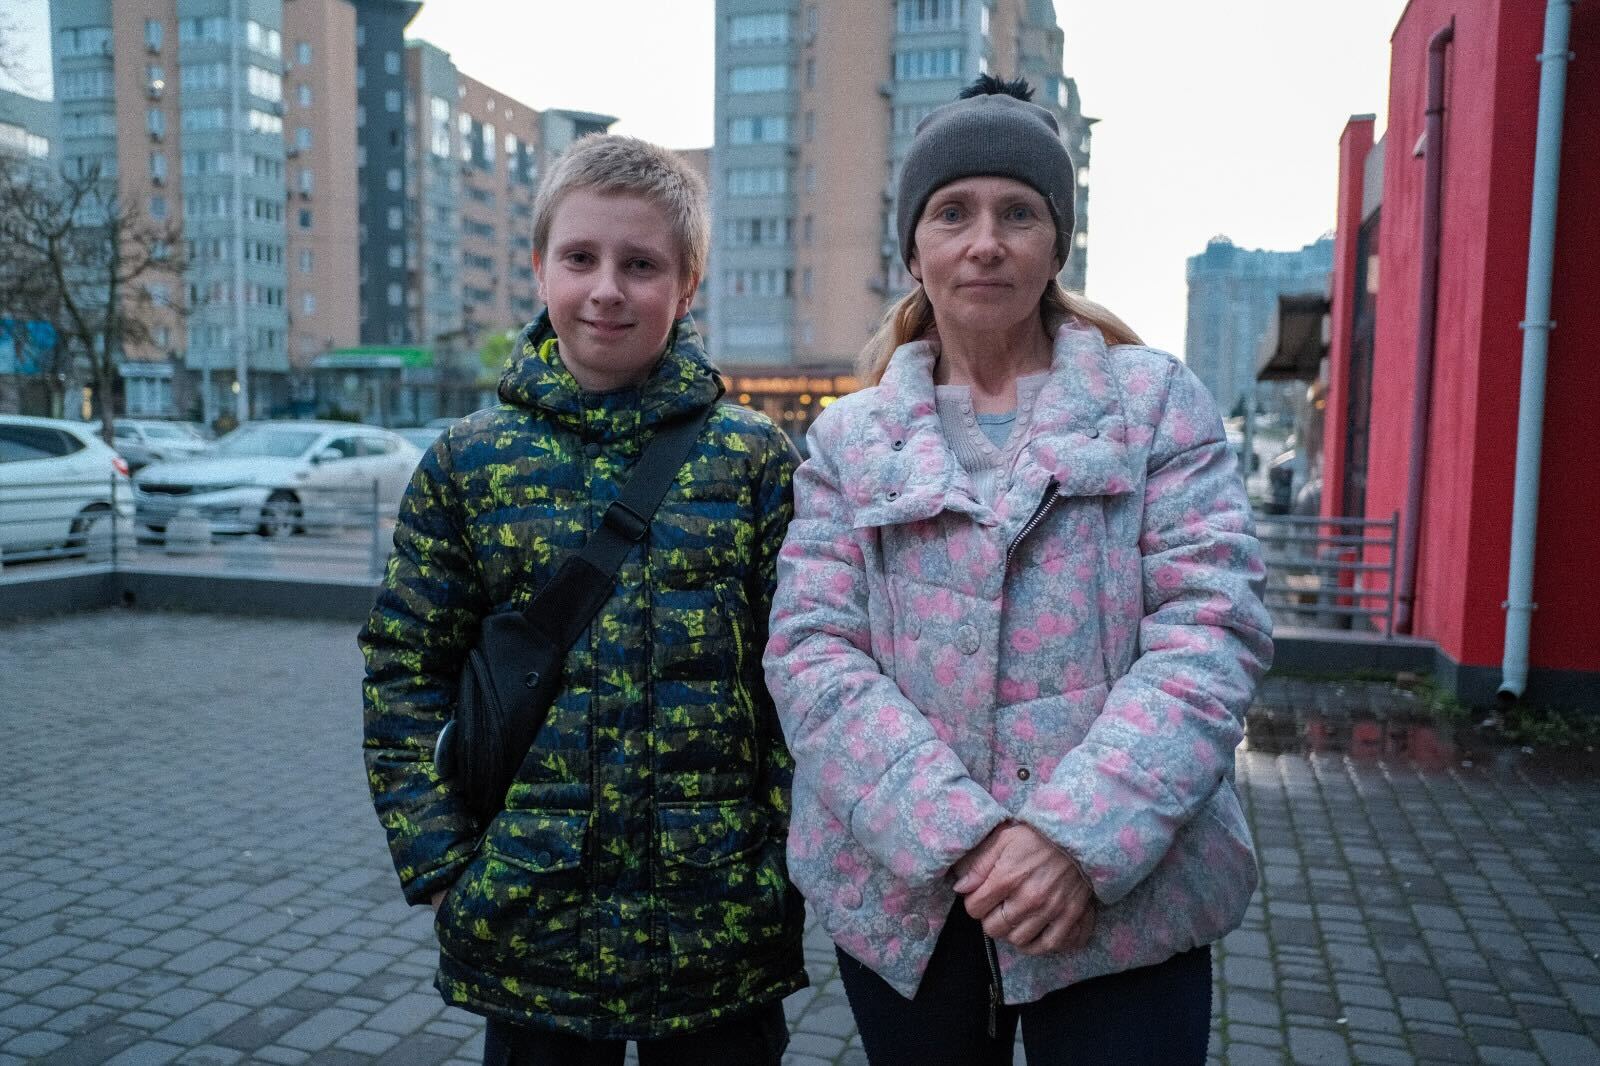 Bogdan Shvetzov, then 12, with his mother in Kyiv in April 2023. It was the first time they had seen each other in seven months